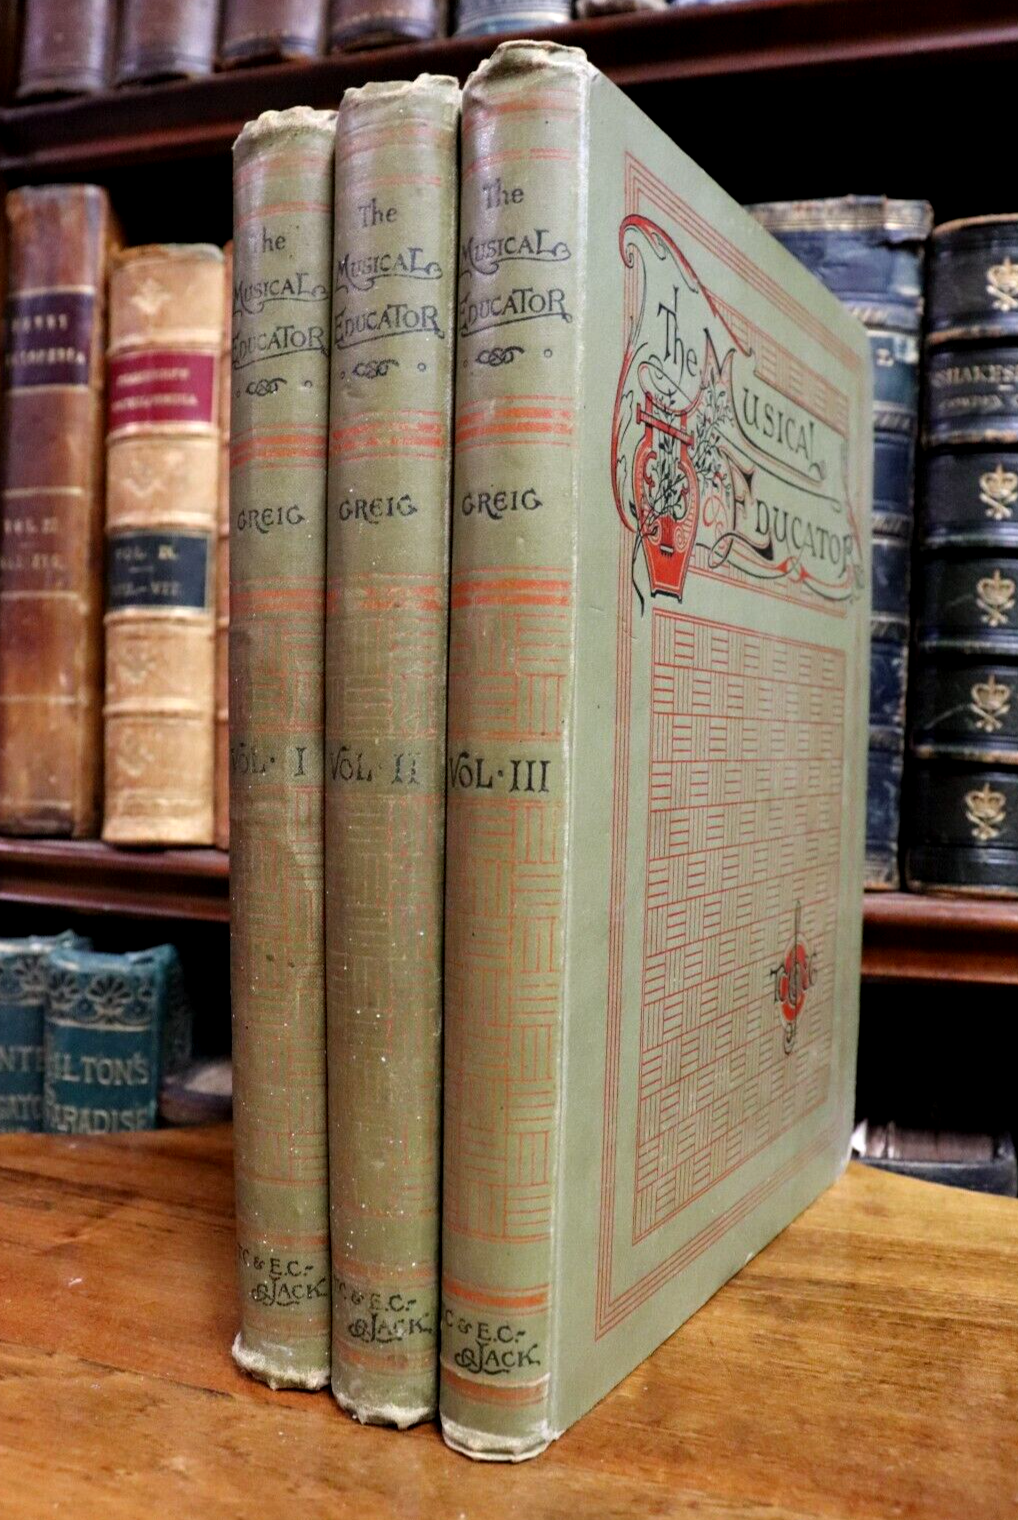 The Musical Educator - c1895 -  3 Volumes - Antique Music Reference Books